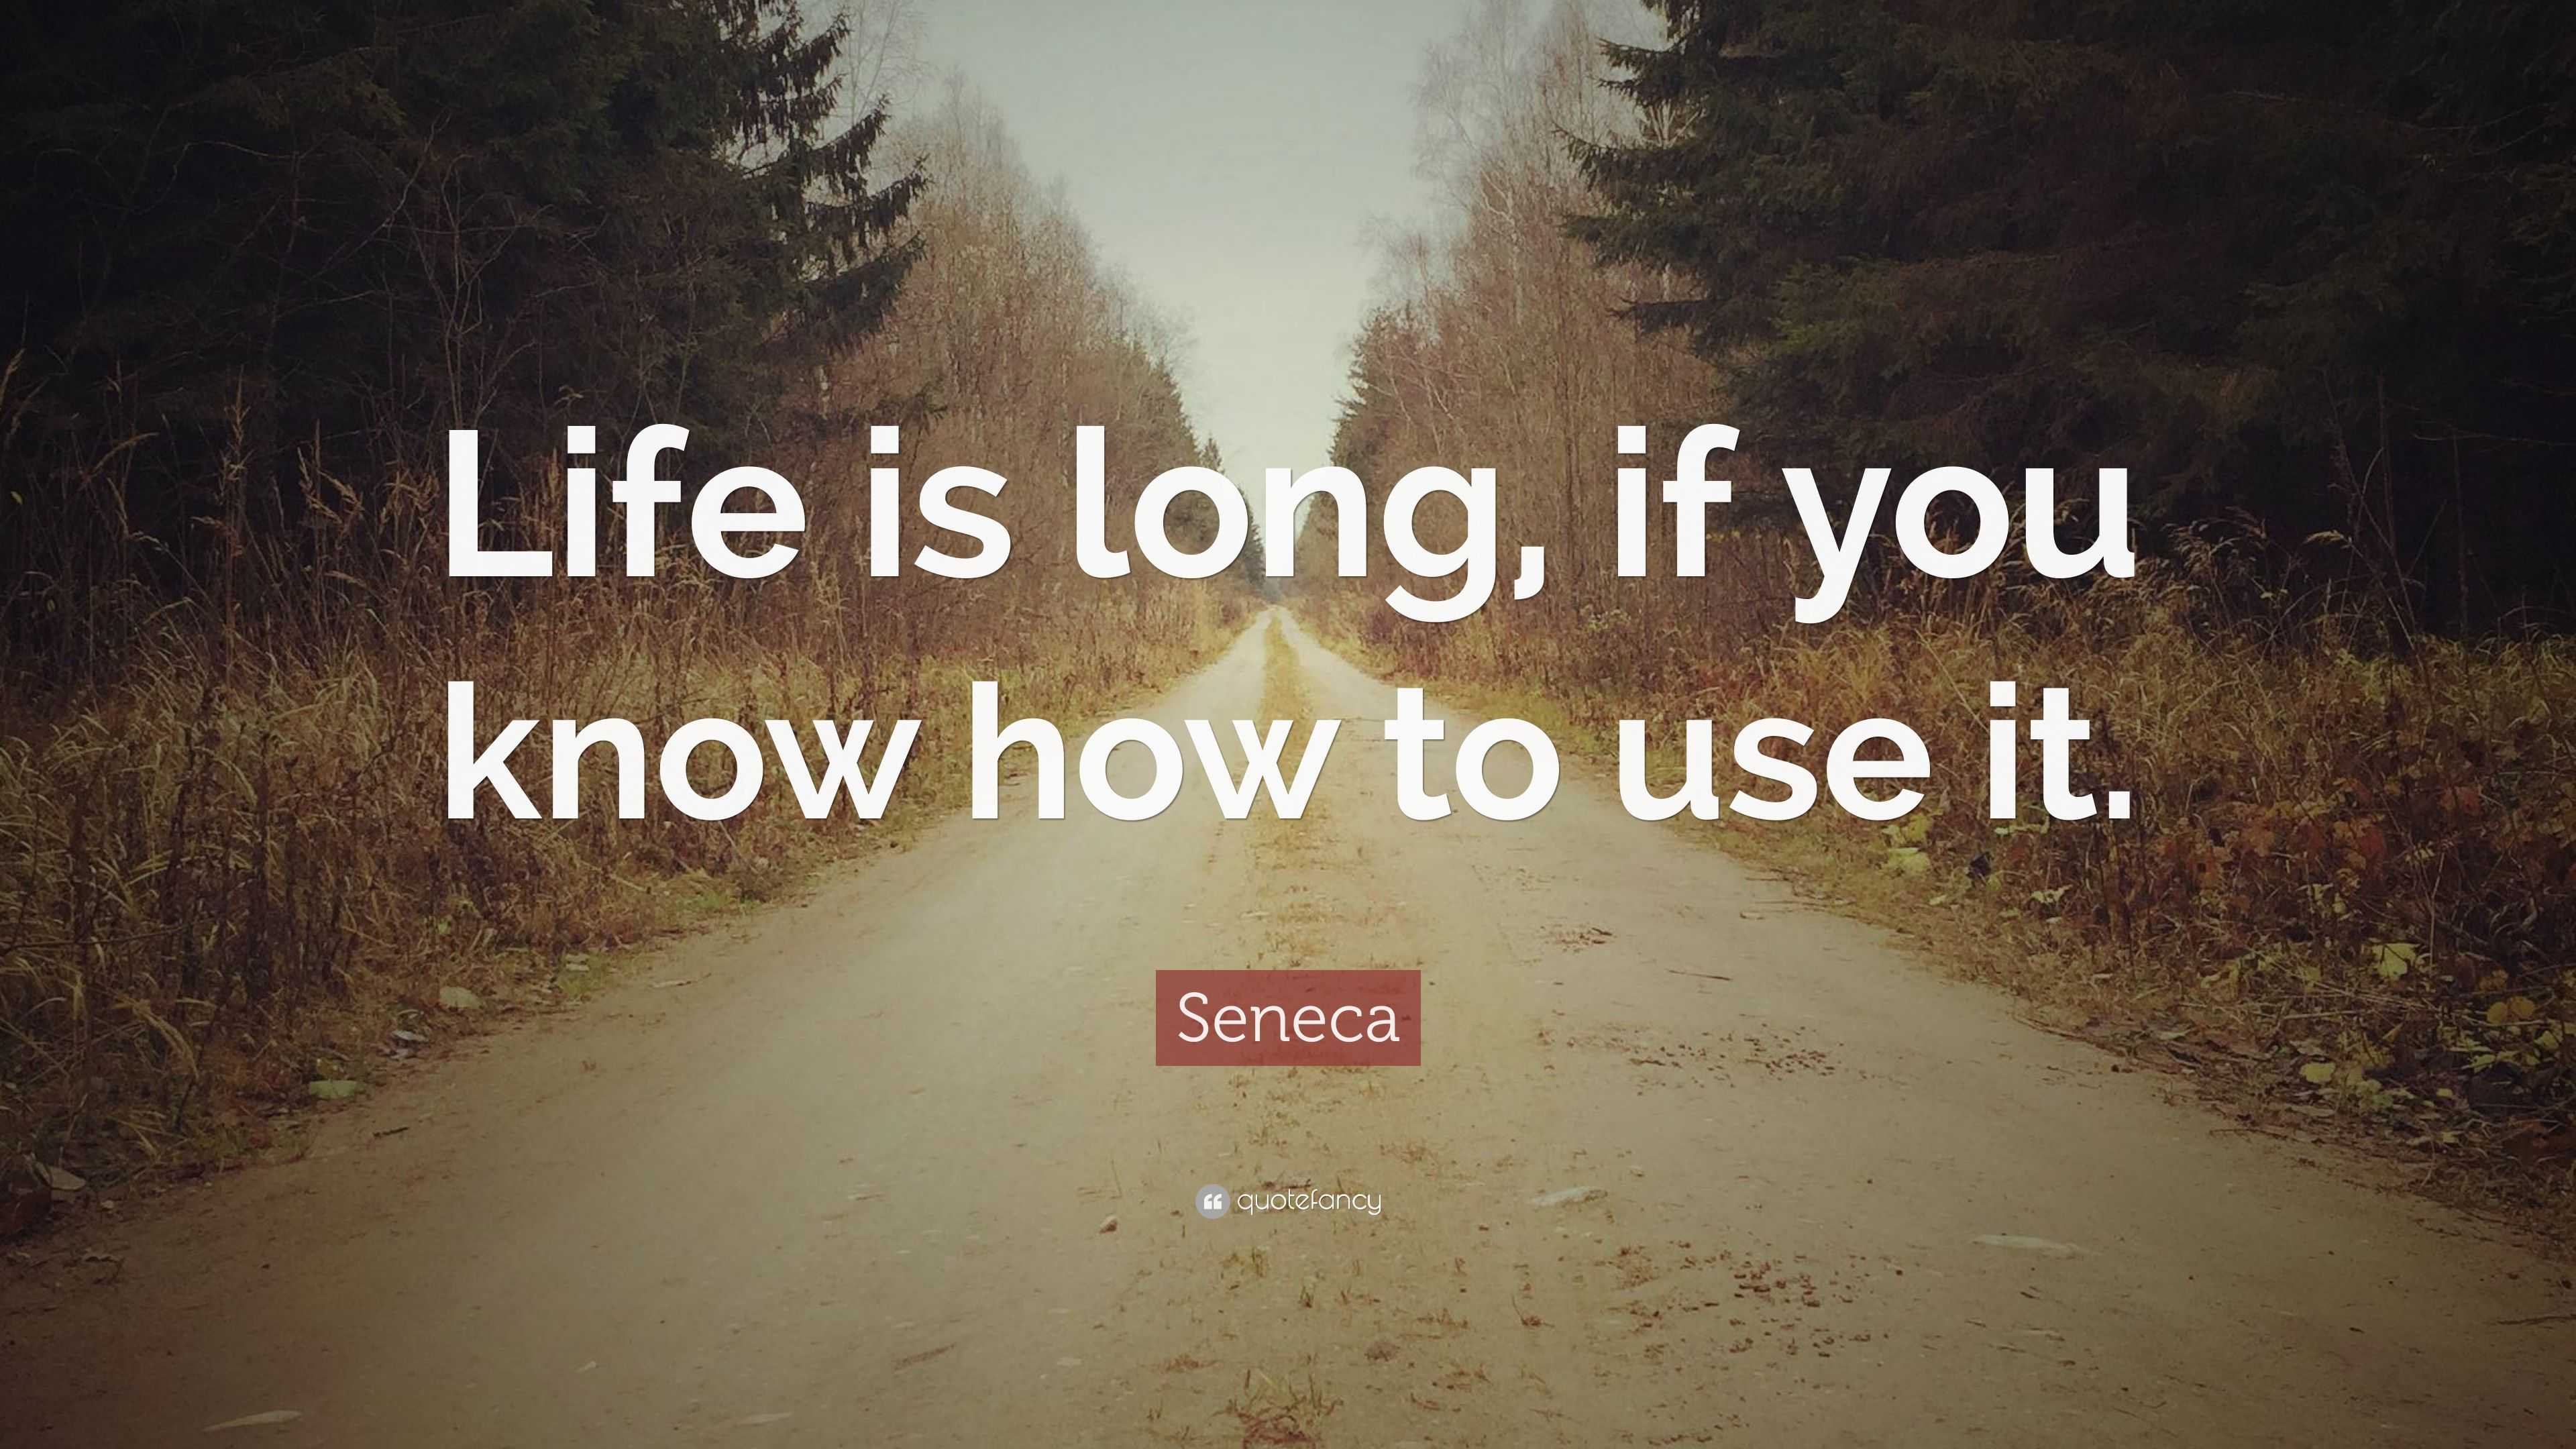 Seneca Quote: “Life is long, if you know how to use it.”